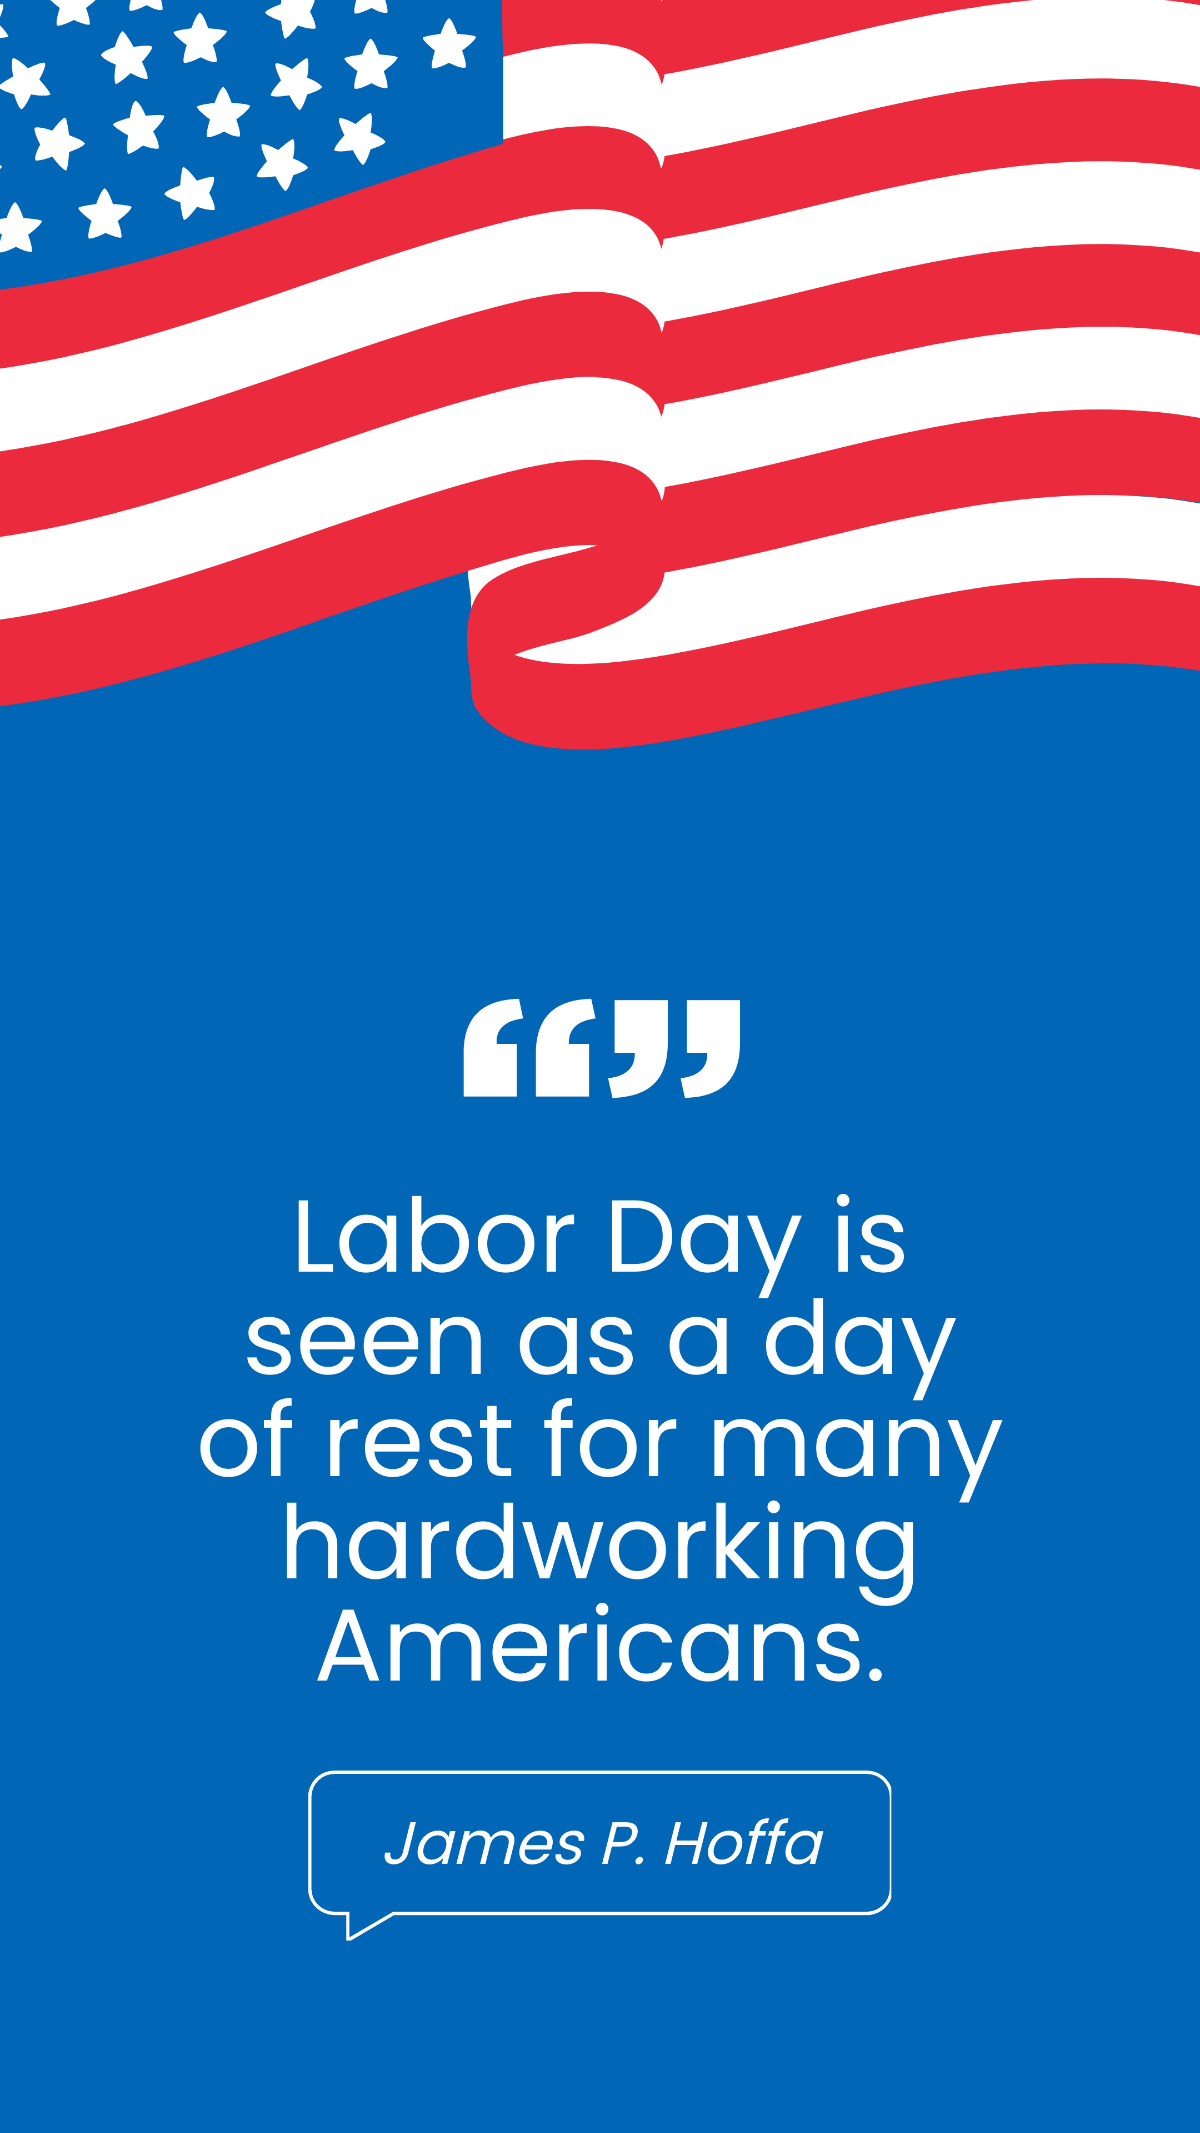 James P. Hoffa - Labor Day is seen as a day of rest for many hardworking Americans. Template